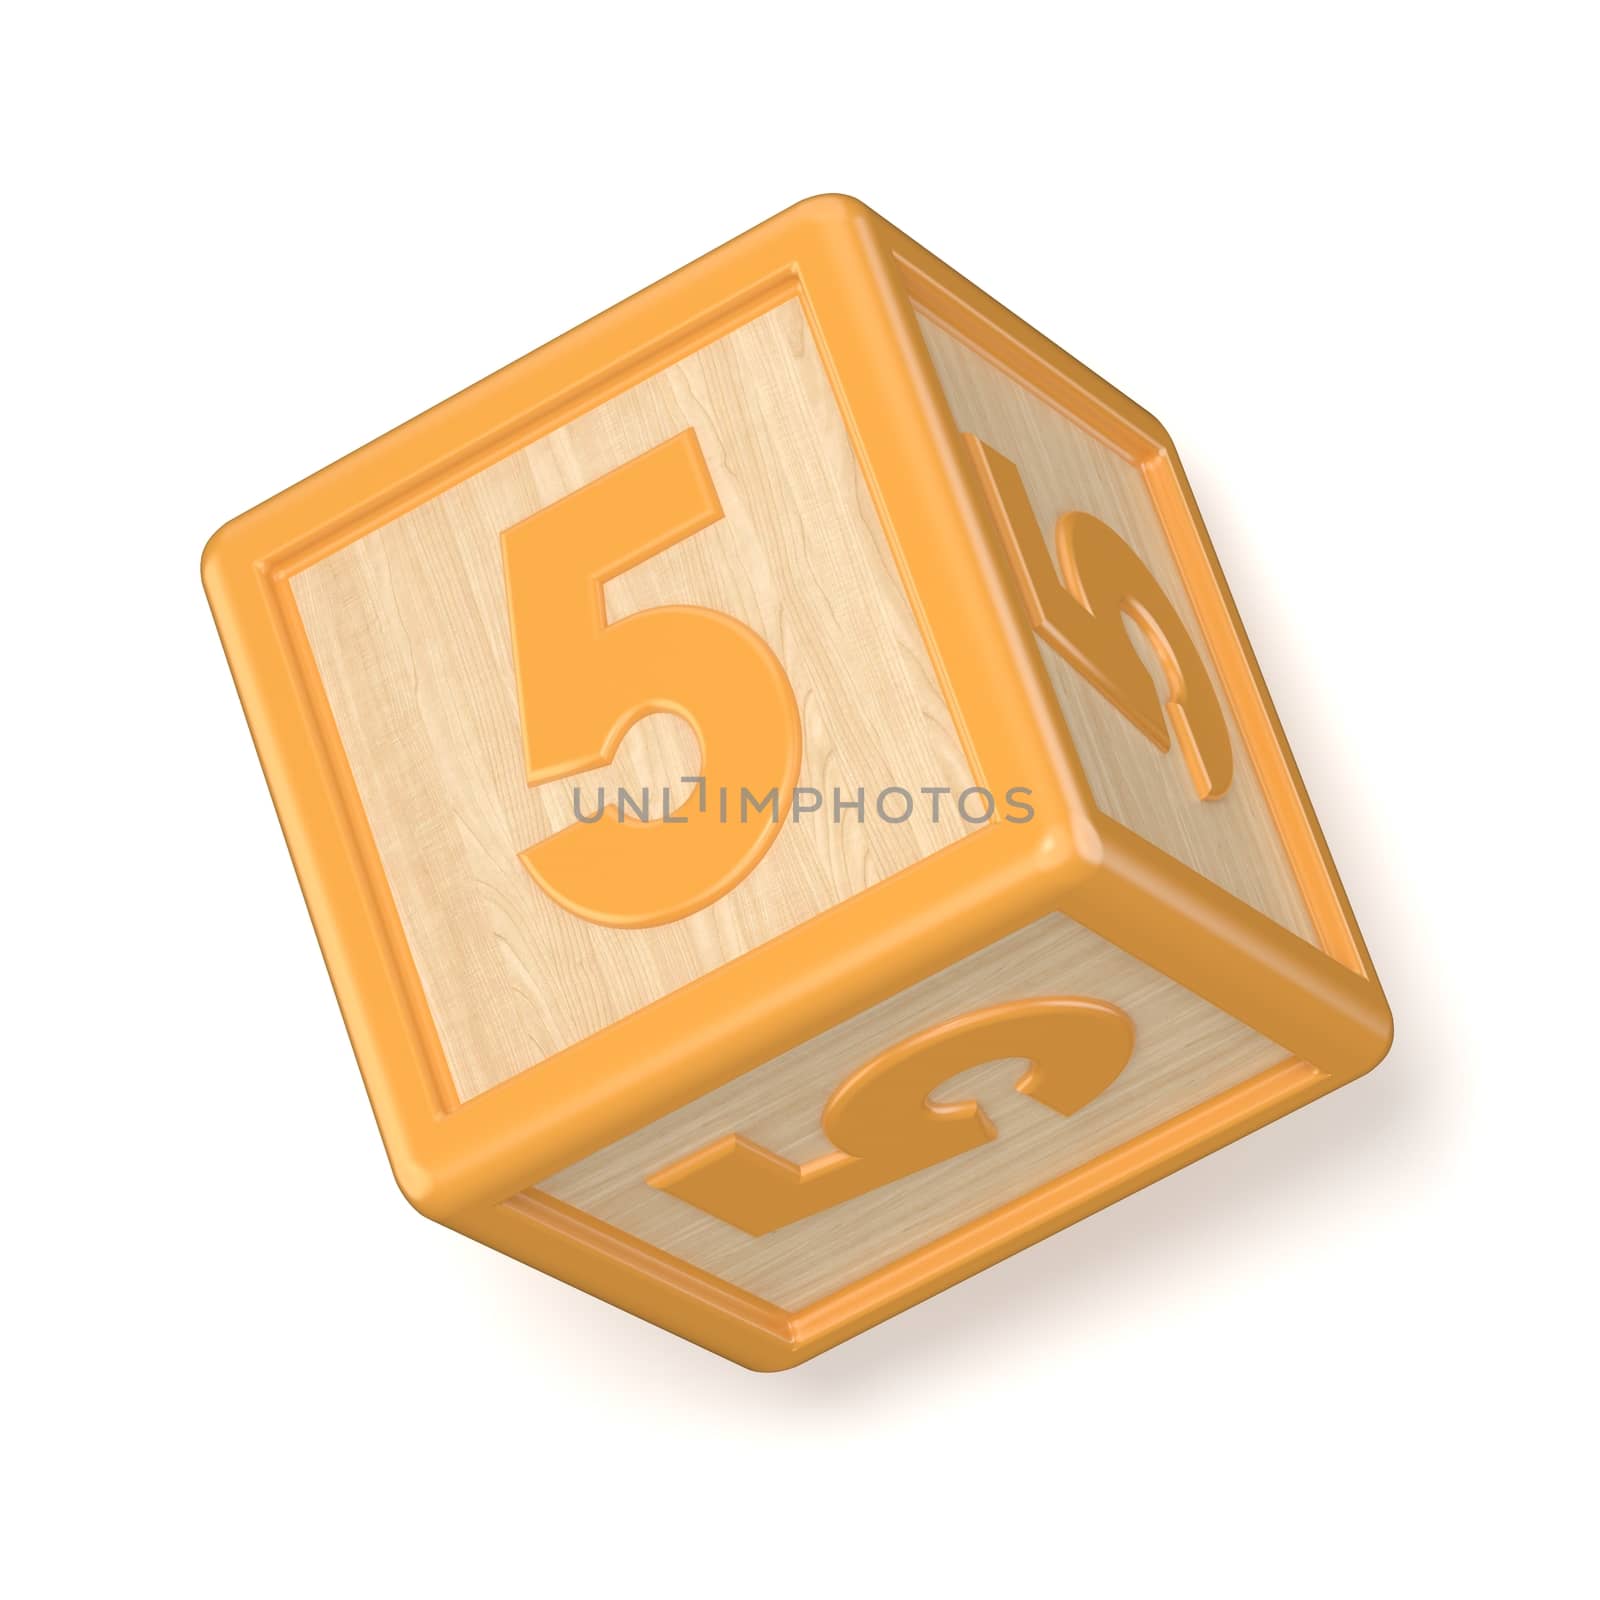 Number 5 FIVE wooden alphabet blocks font rotated. 3D by djmilic